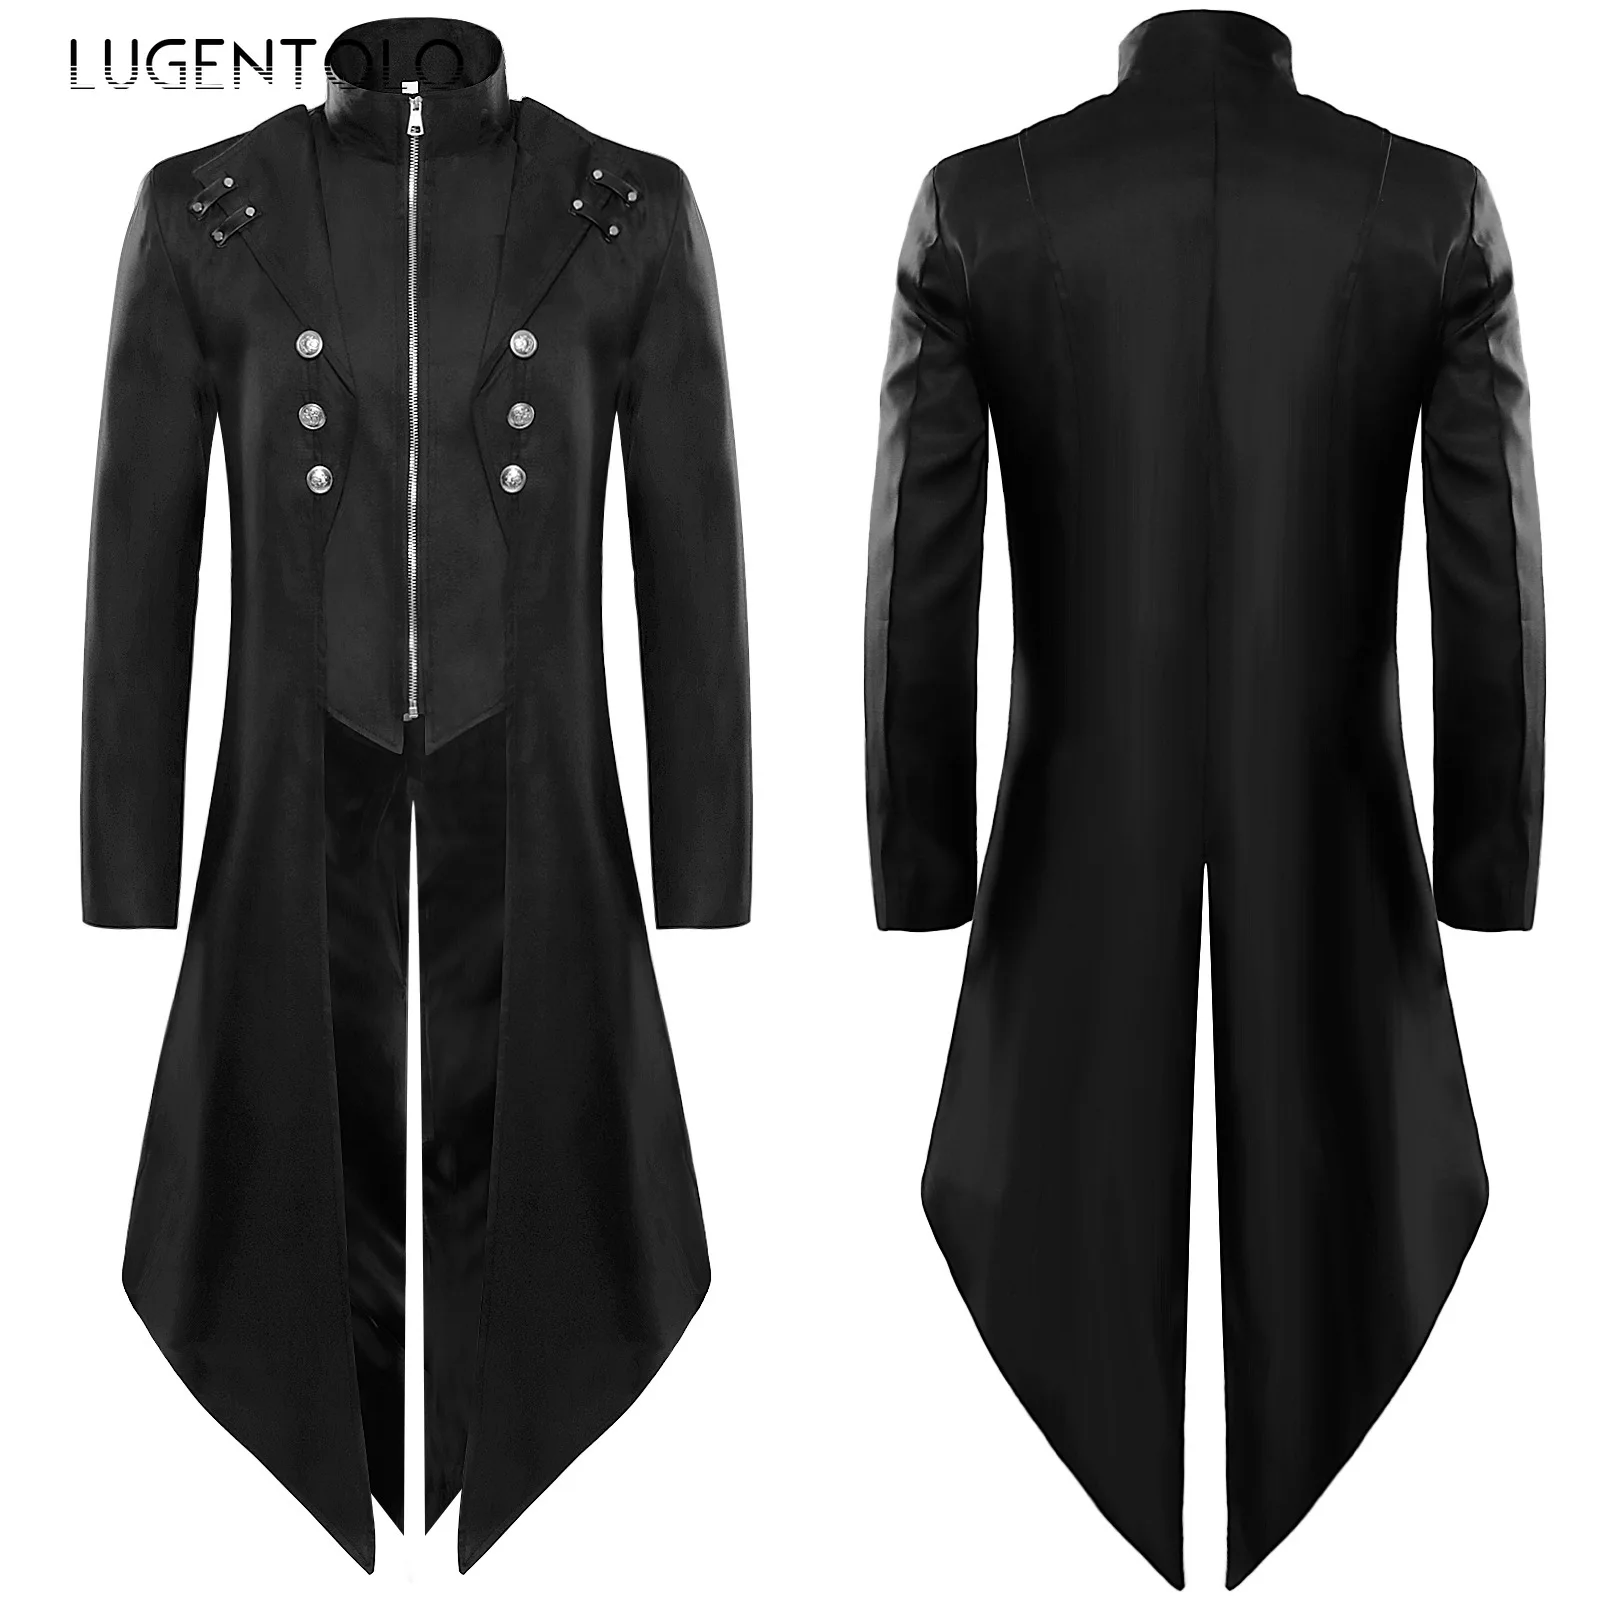 

Men Punk Rock Trench Medieval Tailcoat Costume Zipper New Halloween Tuxedo Party Retro Casual Steampunk Gothic Jacket